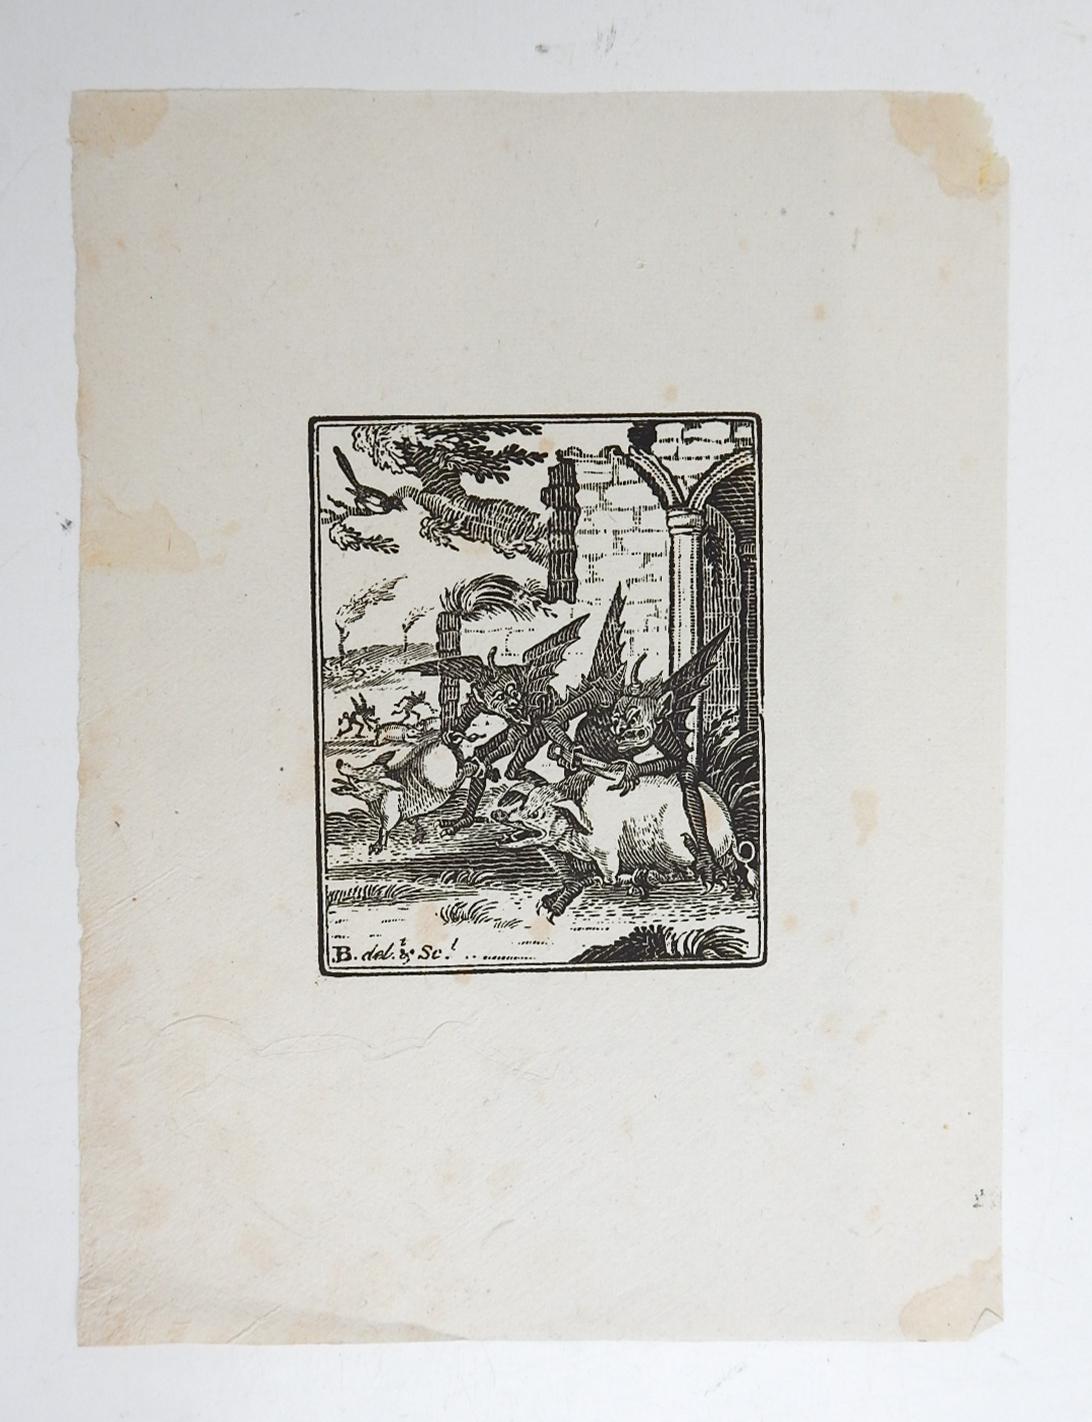 Small 1790 British woodcut book plate print on laid paper by John Bewick (1760–1795) England, younger brother of Thomas Bewick.  Printed for Proverbs Exemplified and published by the Rev. J. Trusler, and sold at the Literary-Press, 1790.  Proverb